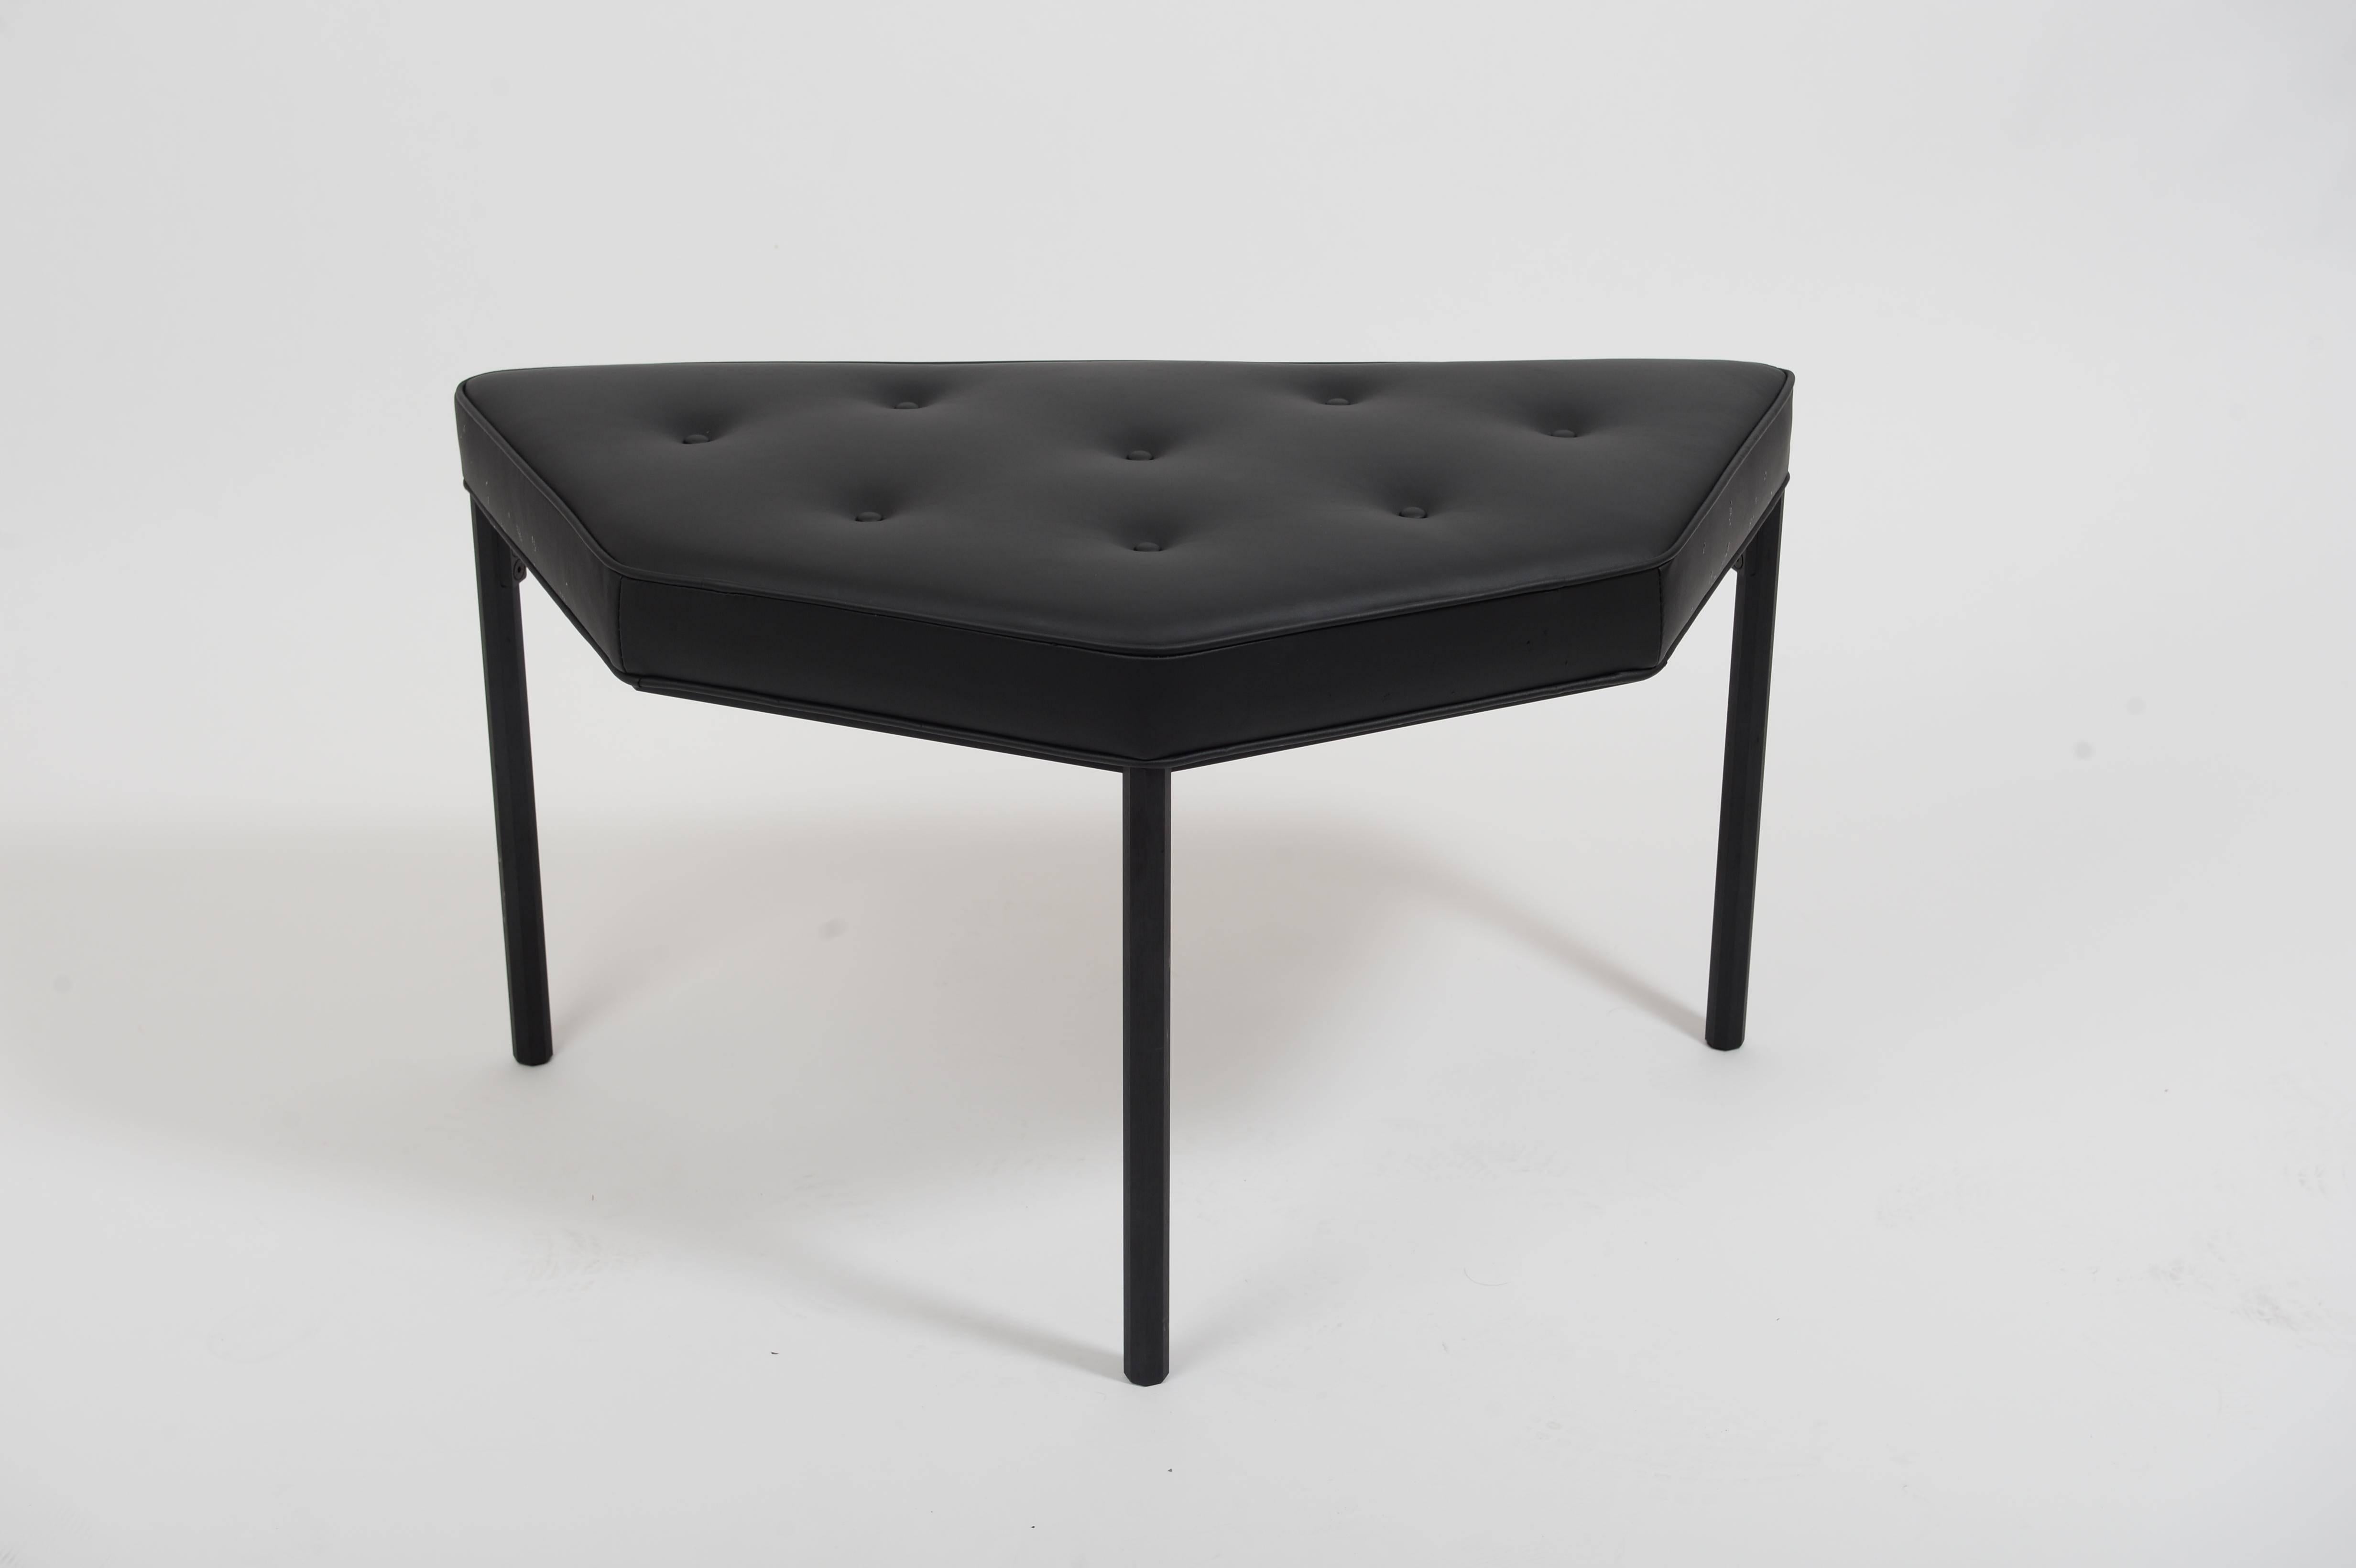 This half-octagon shaped stool is a modern take on the demilune vanity stool. Octagon-shaped legs are cnc-milled out of square aluminum solid bar, and hand brushed and anodized in satin black. Legs are connected via custom milled aluminum braces and